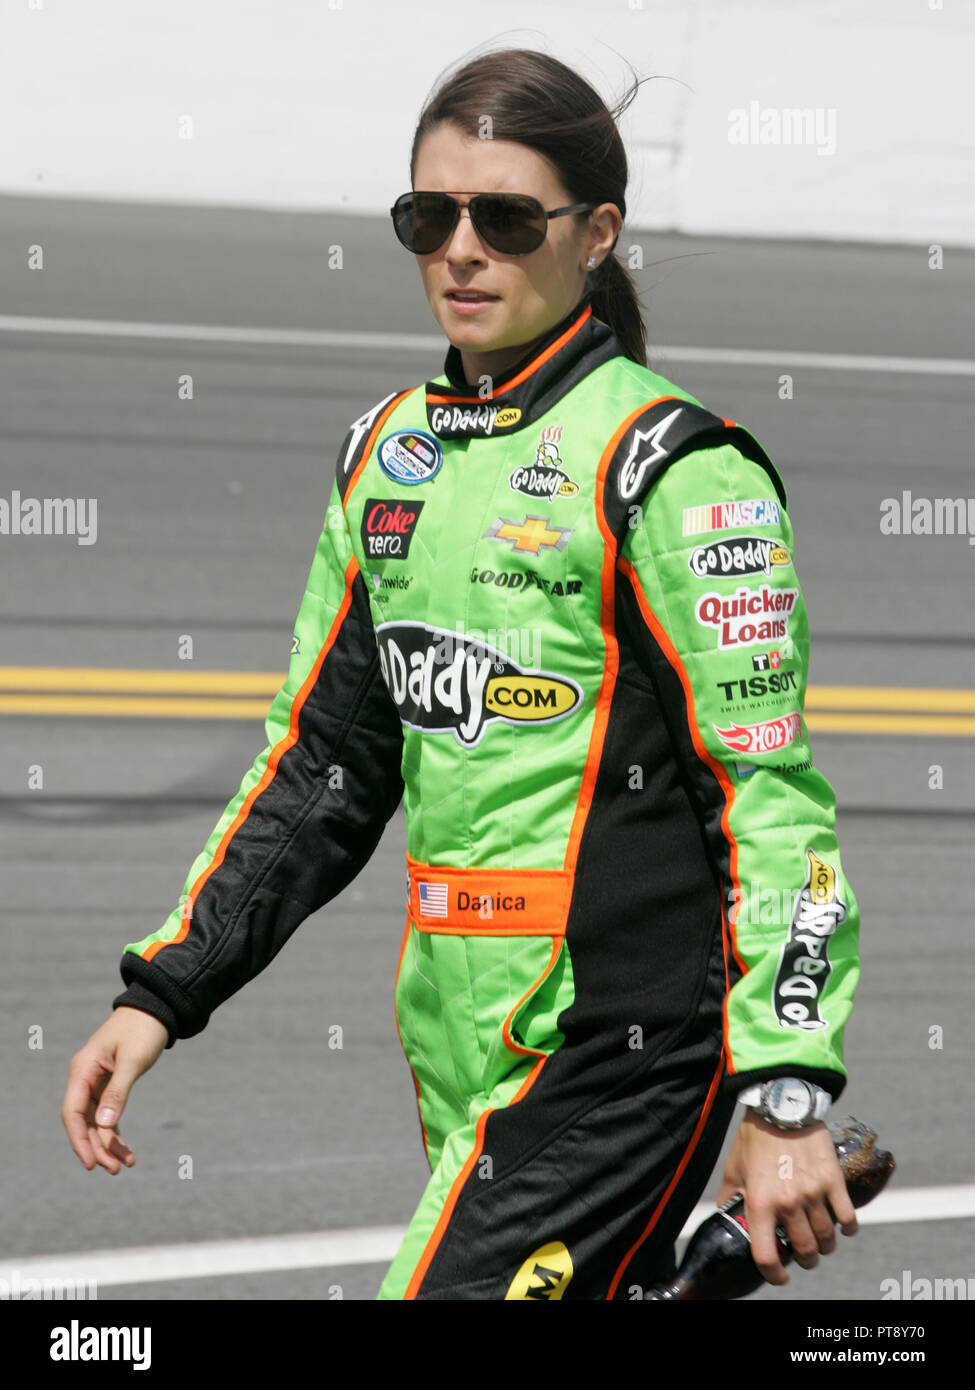 Danica Patrick walks to her car on pit road prior to the start of the NASCAR Nationwide Series DRIVE4COPD 300, at Daytona International Speedway in Daytona, Florida on February 23, 2013. Stock Photo